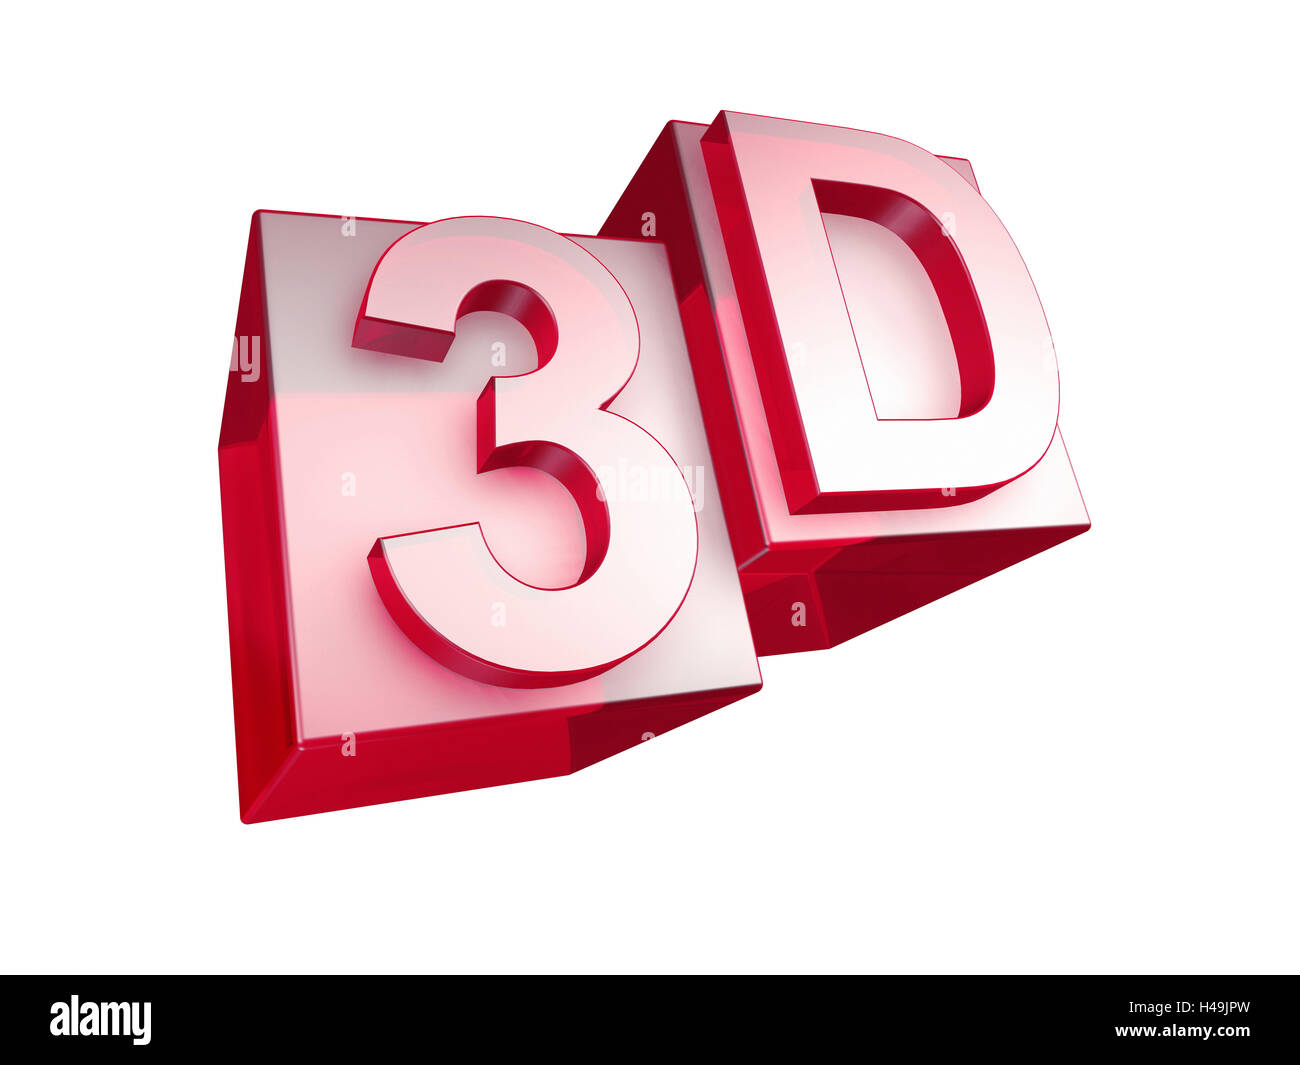 3D, red, white background, Stock Photo